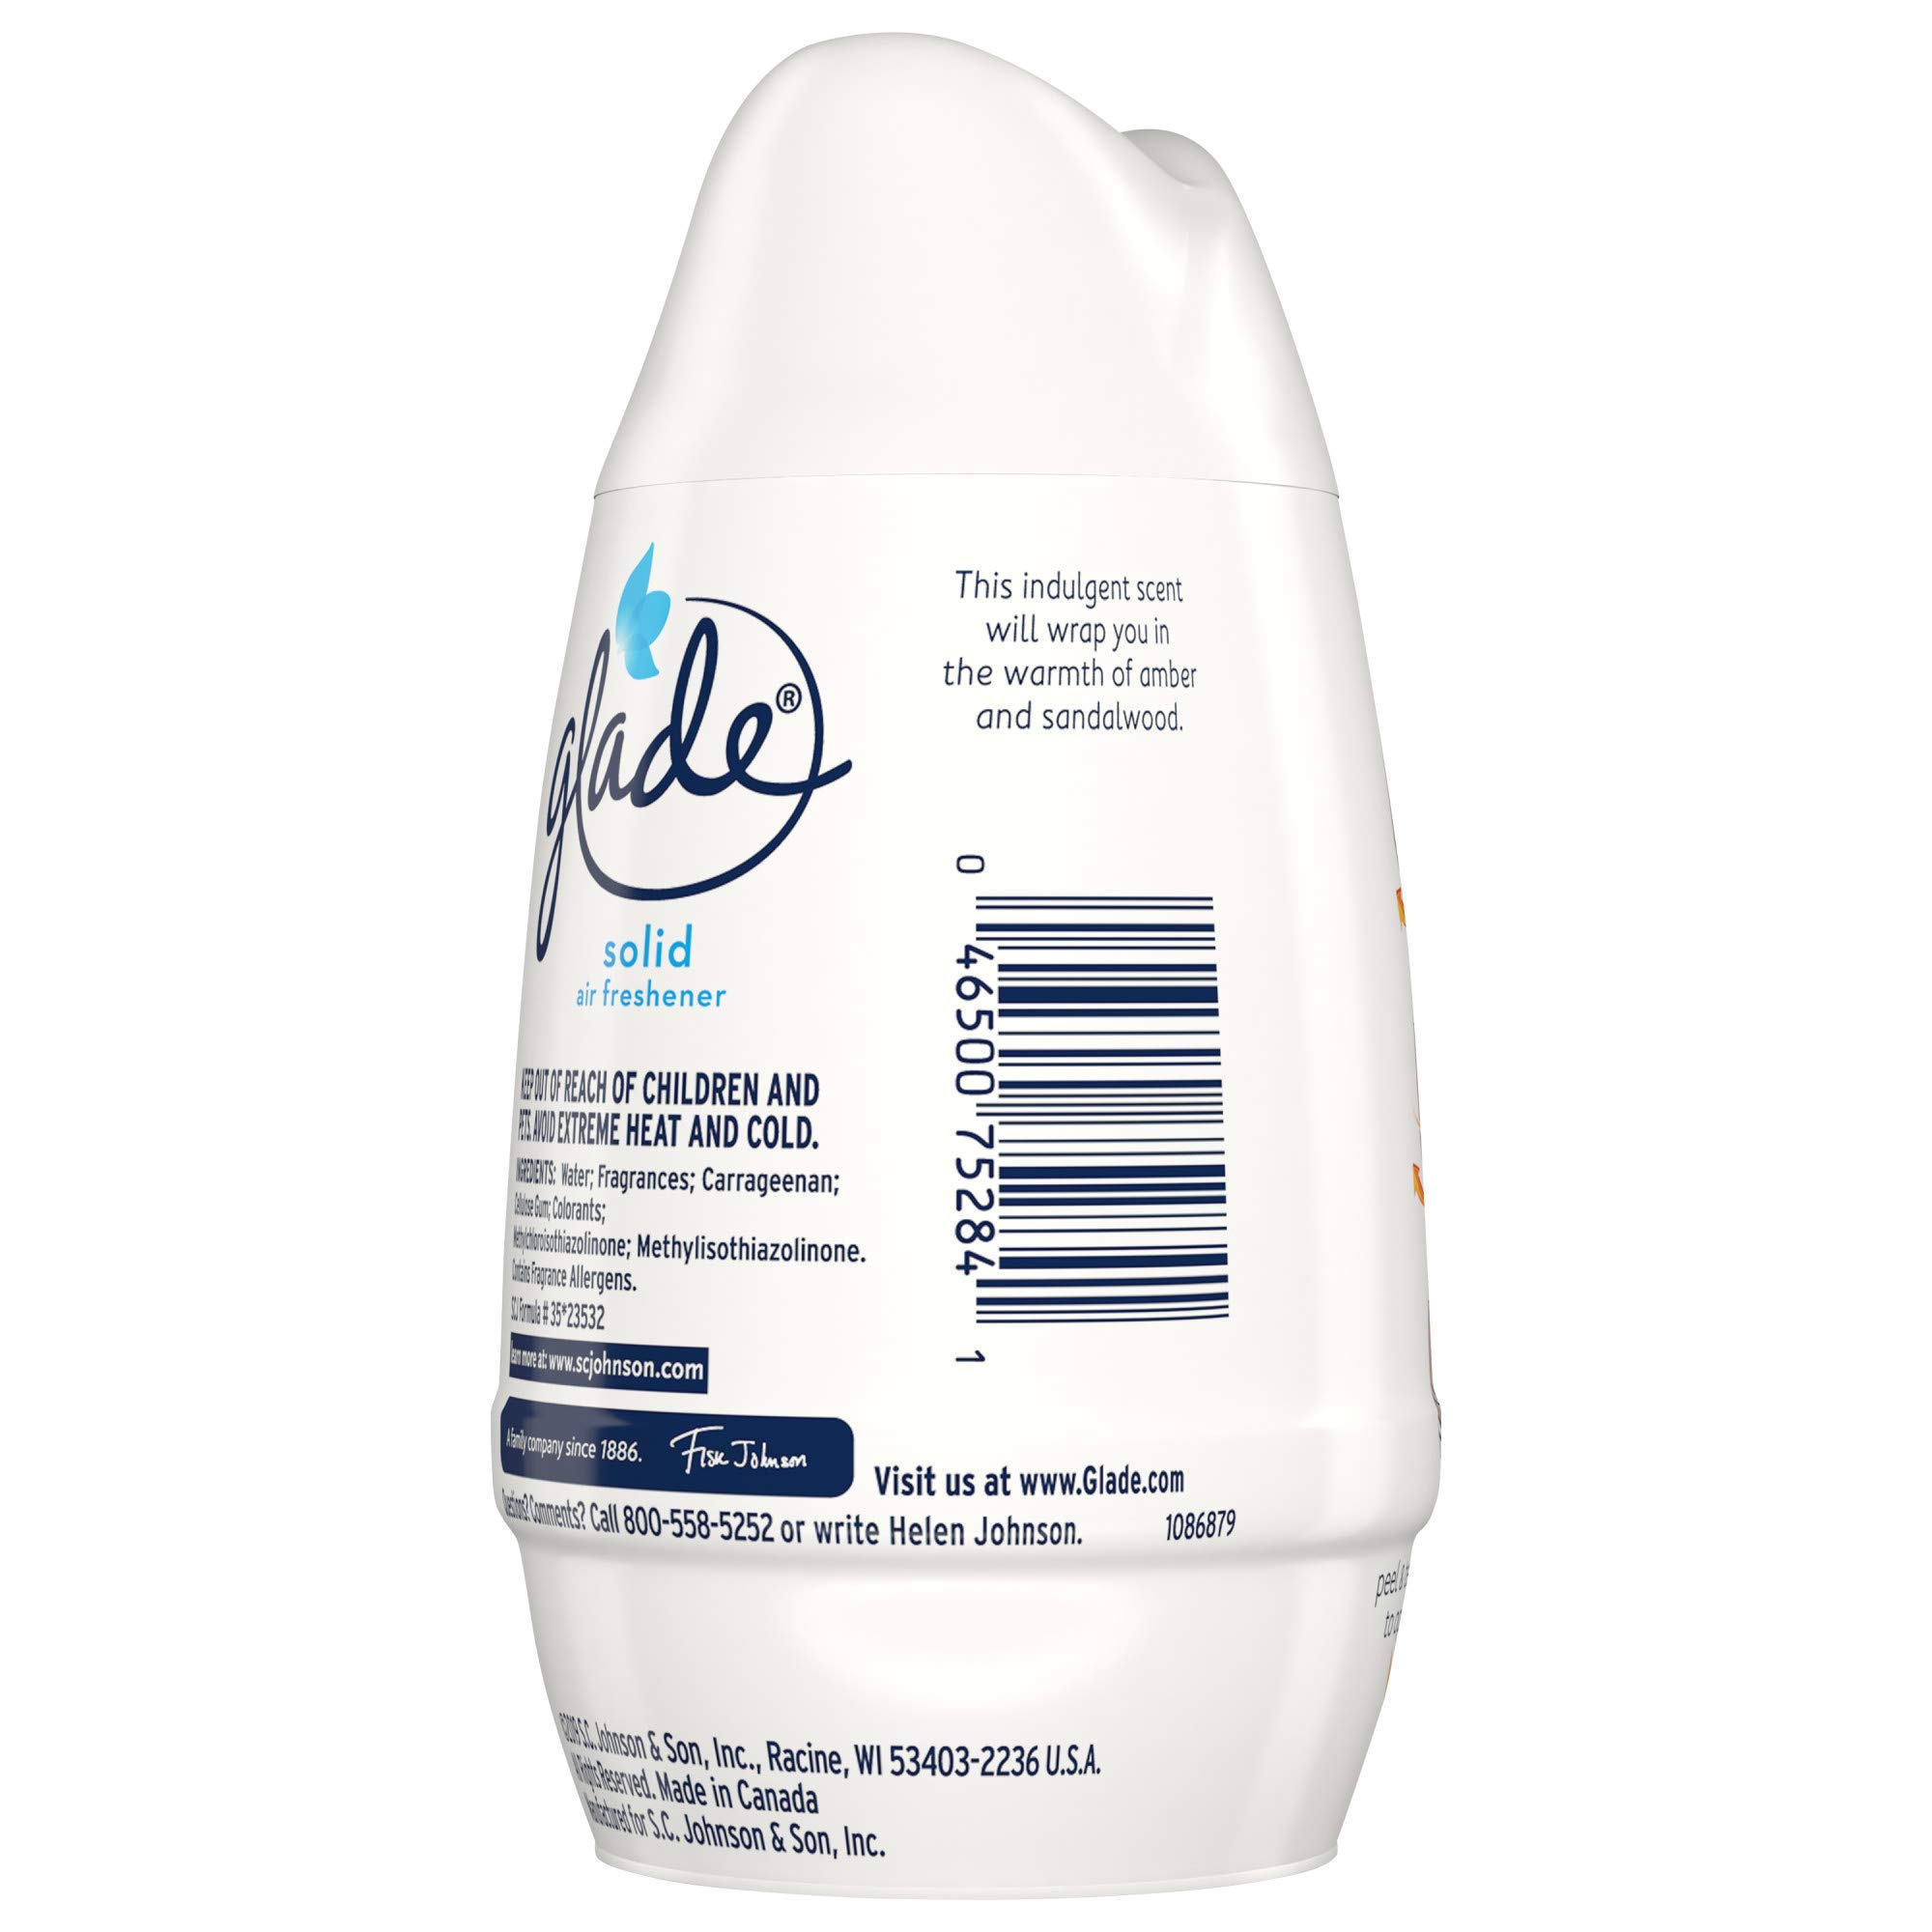 Glade Solid Air Freshener, Deodorizer for Home and Bathroom, Red Honeysuckle Nectar, 6 Oz